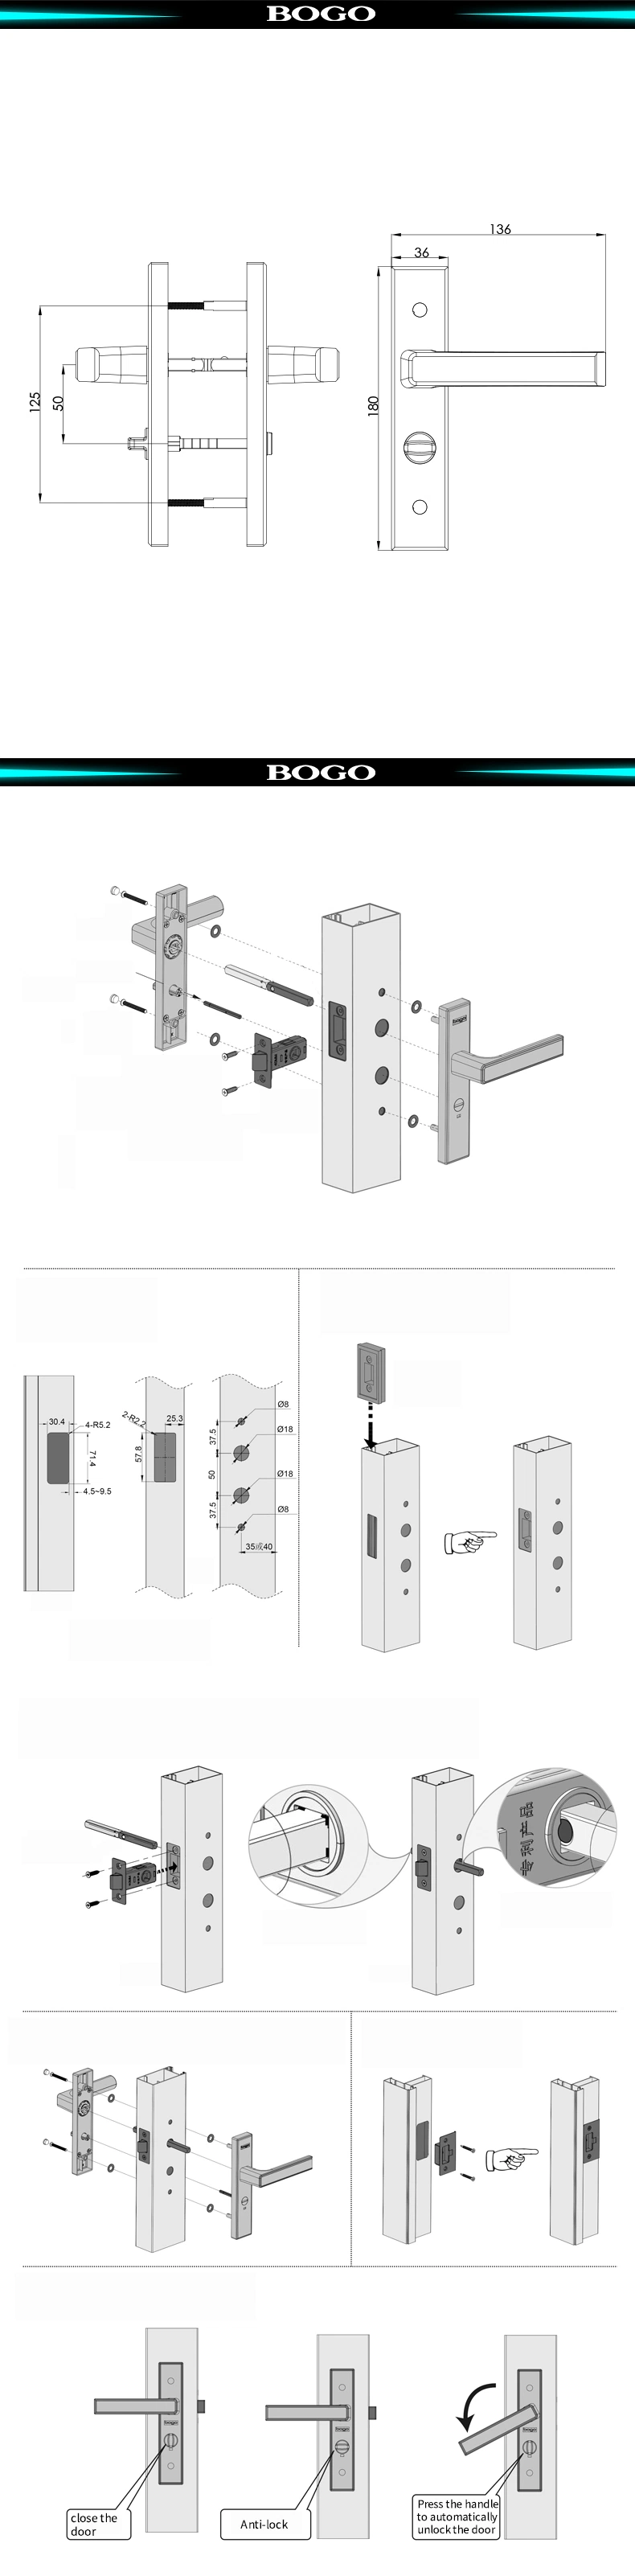 Passage Door Lock Closet Glass Good Quality China Manufactory Folding Square-Shaped Solid Lever Opener Aluminum Left or Right Handle Doors Handles Lock